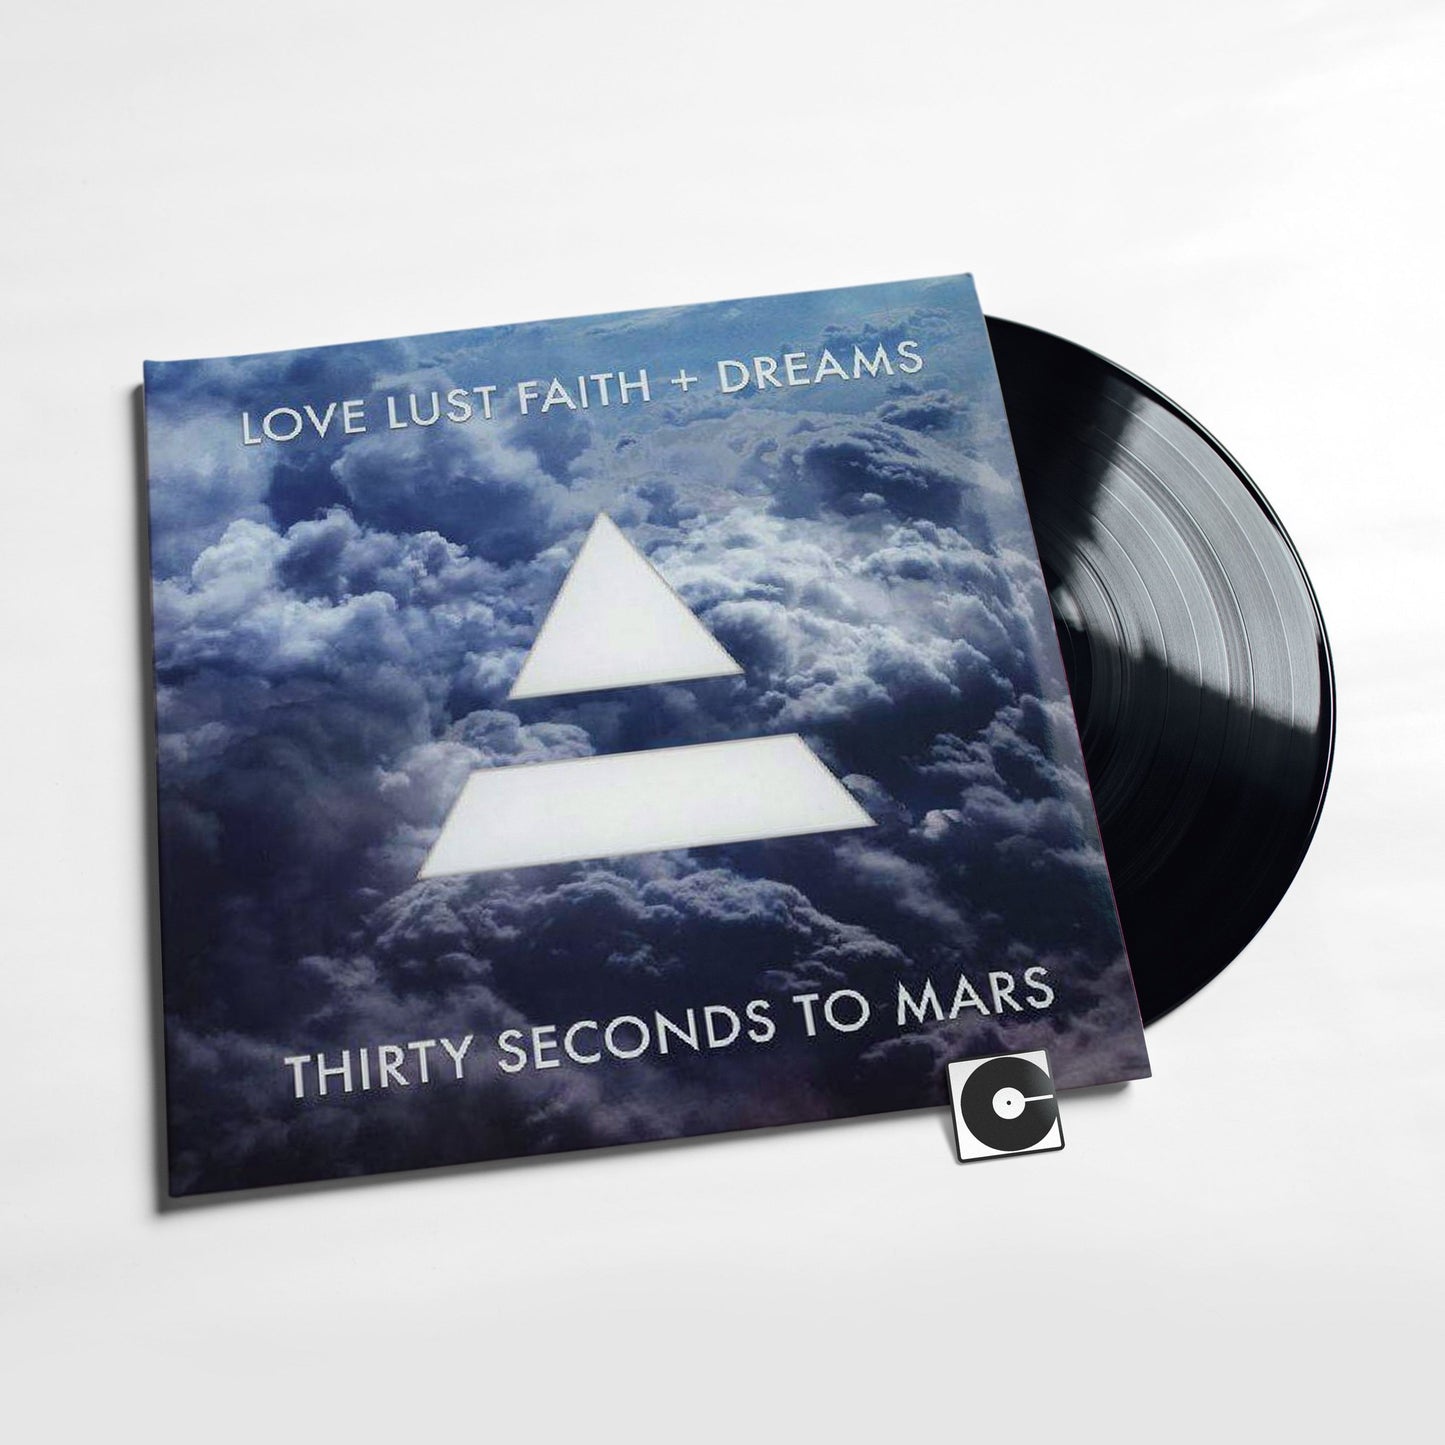 Thirty Seconds To Mars - "Love Lust Faith + Dreams"